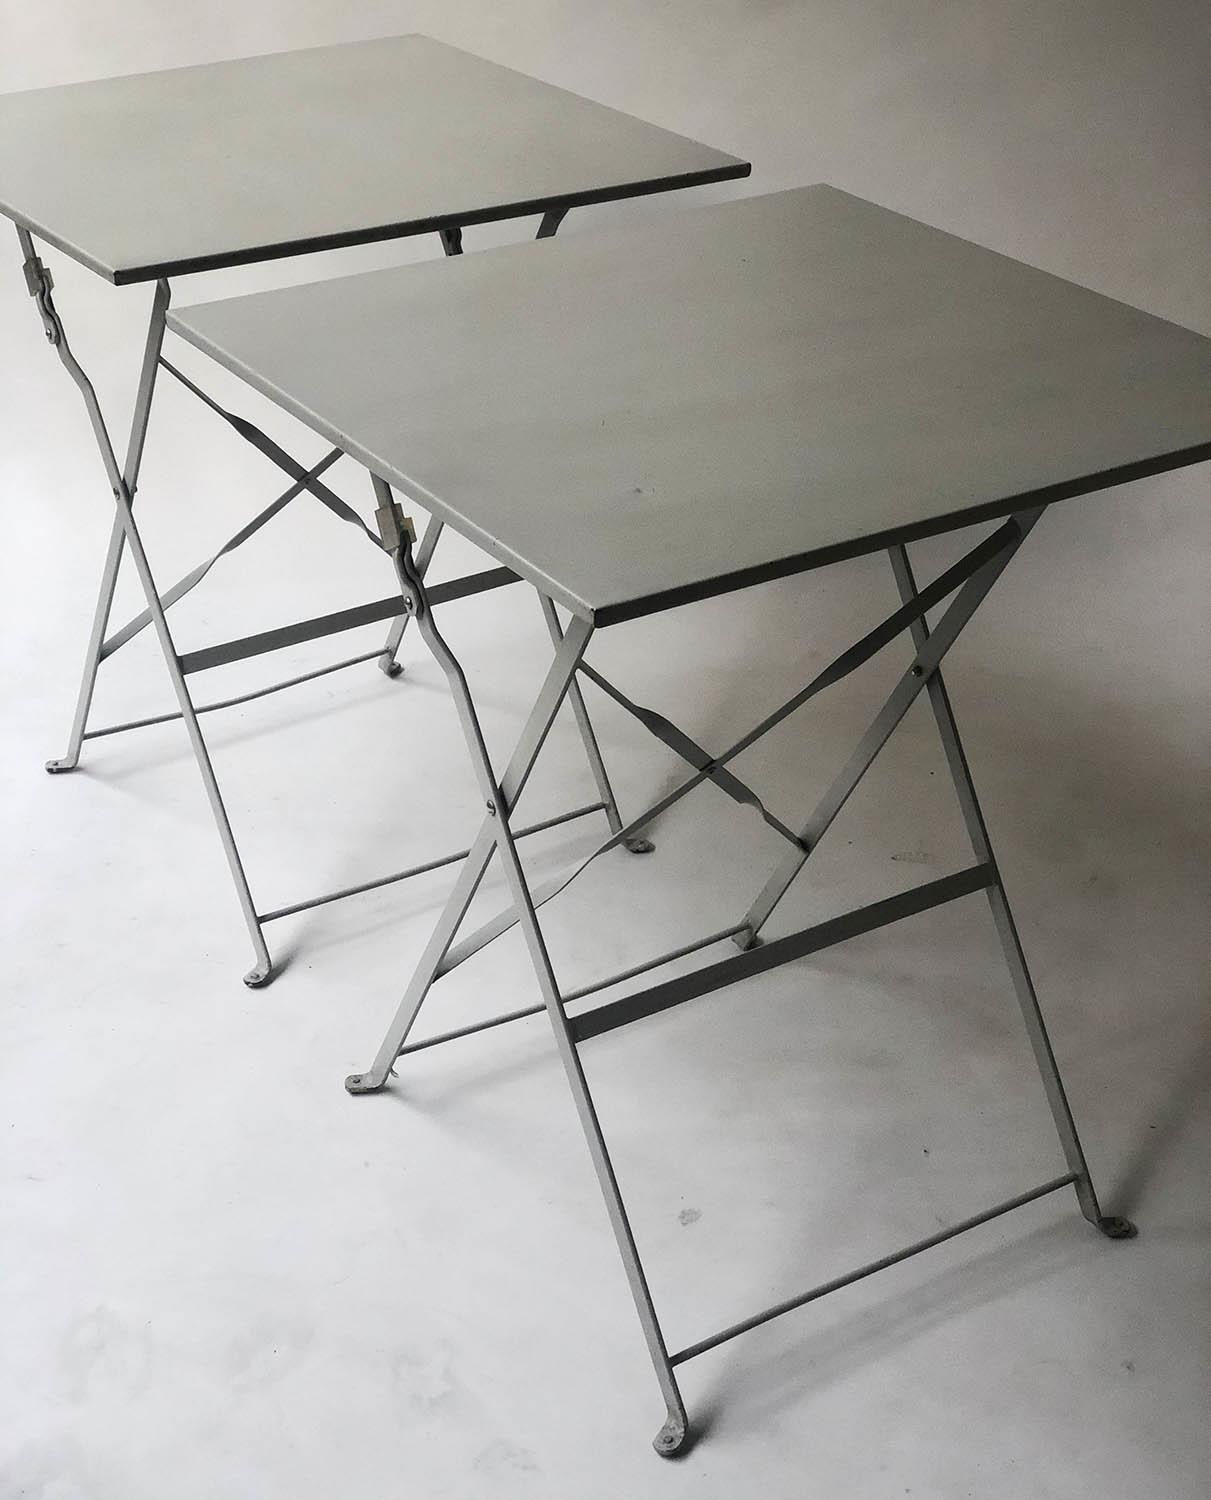 BISTRO TABLES, a pair, French grey painted, square with folding x supports, 60cm x 60cm x 72cm. (2) - Image 2 of 3